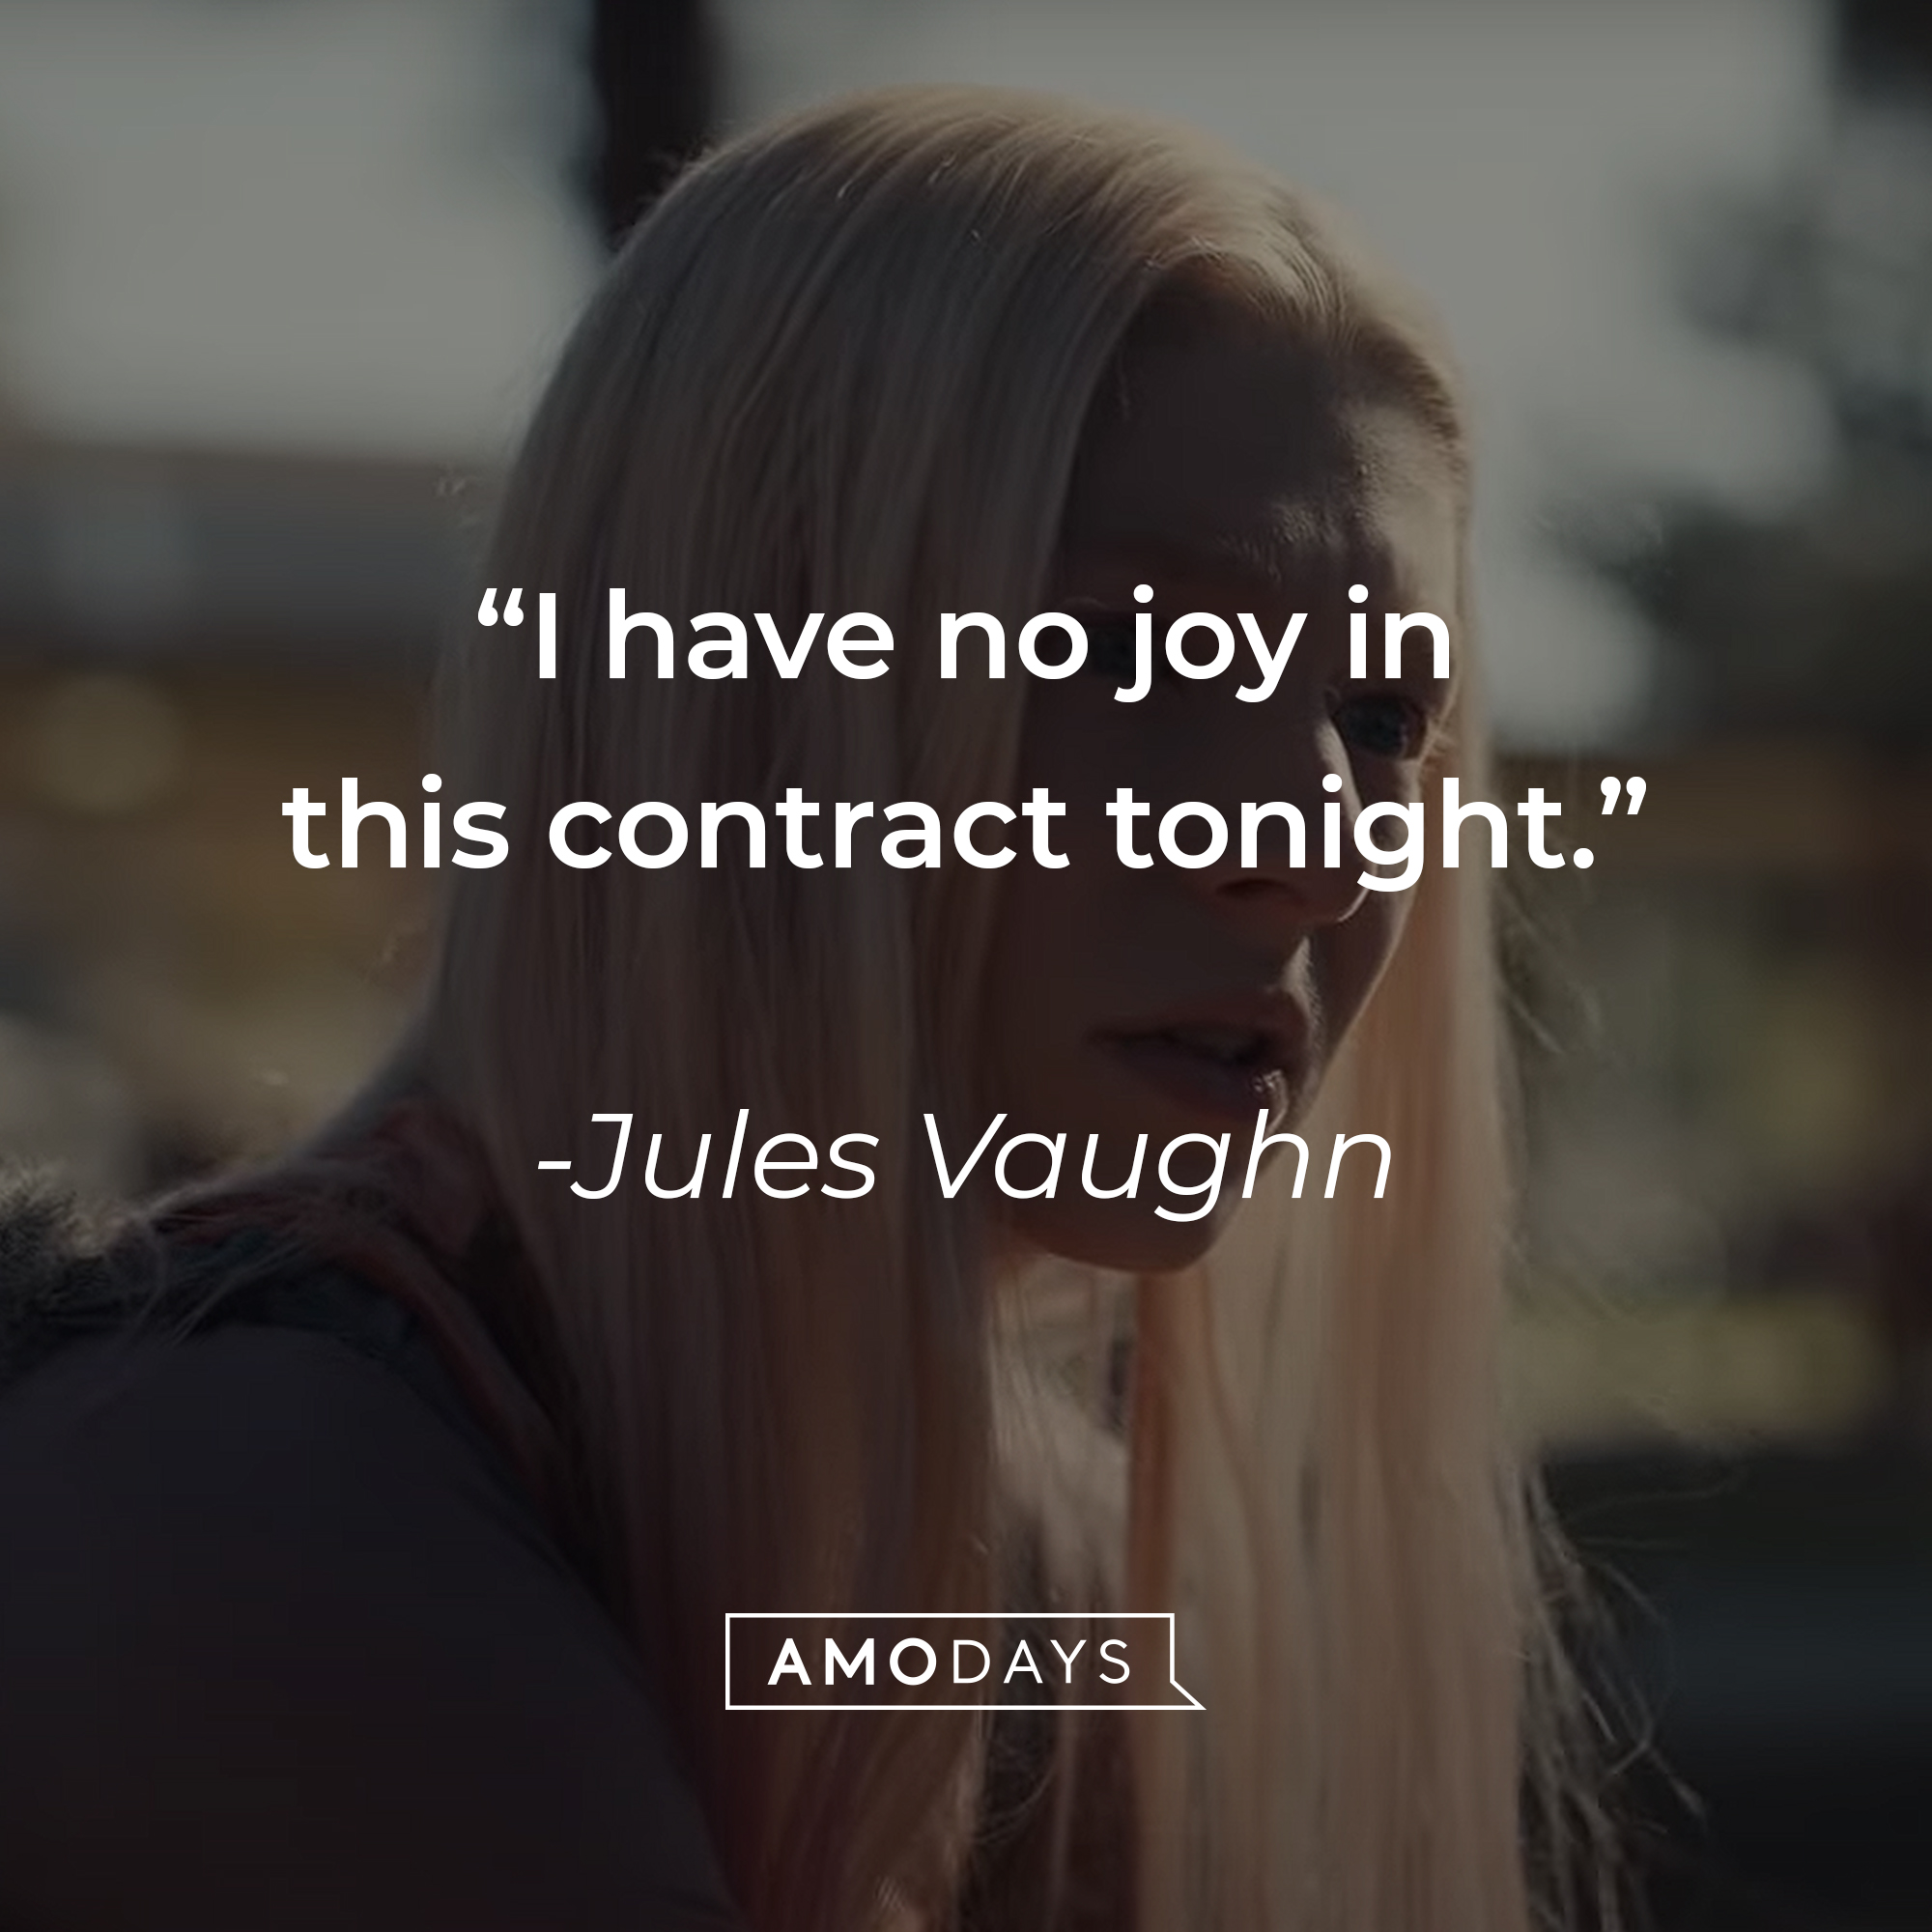 Jules Vaughn with her quote: "I have no joy in this contract tonight." | Source: HBO